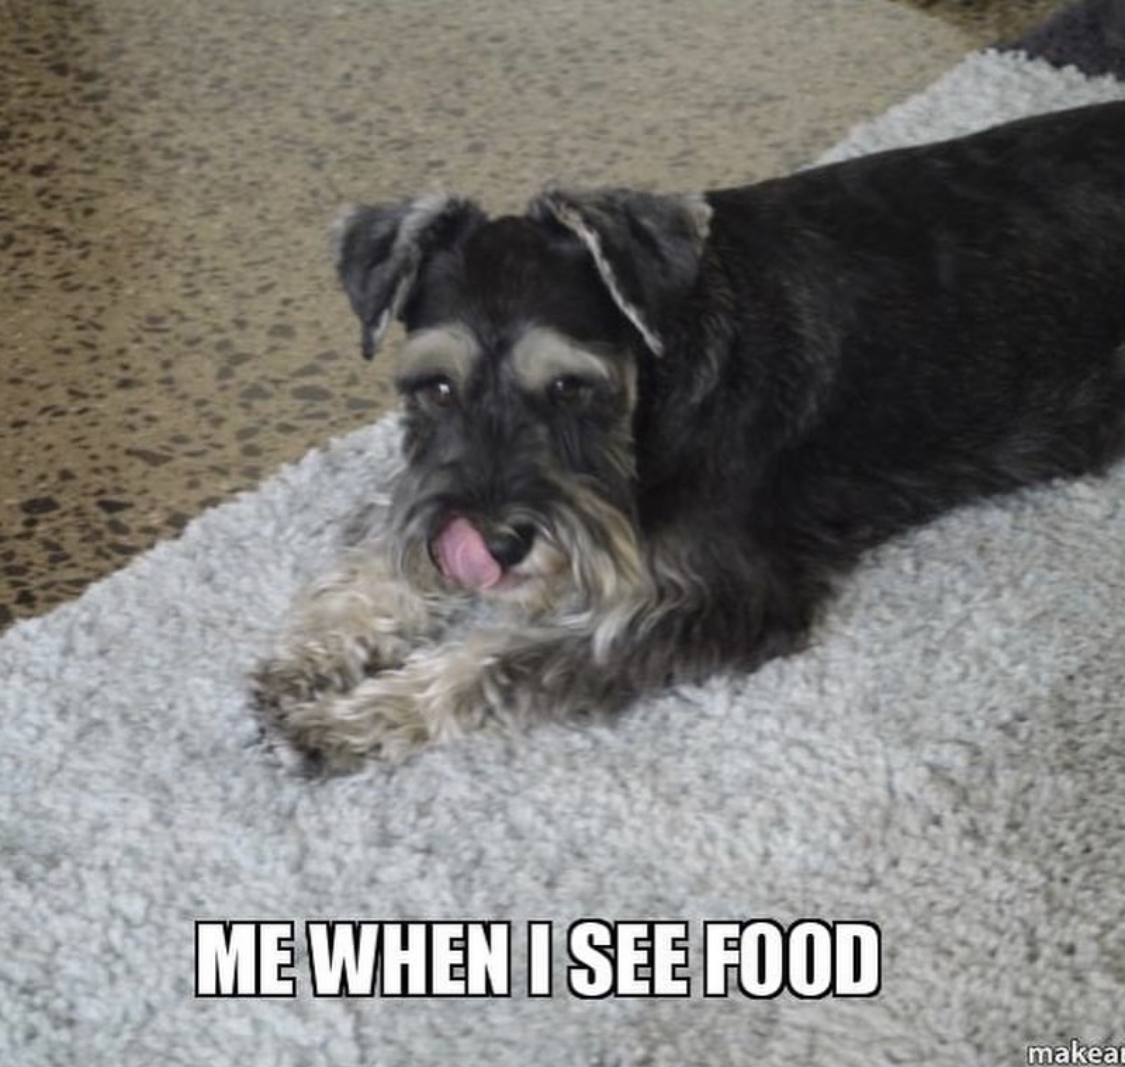 Schnauzer lying down on the carpet licking its mouth photo with a text 